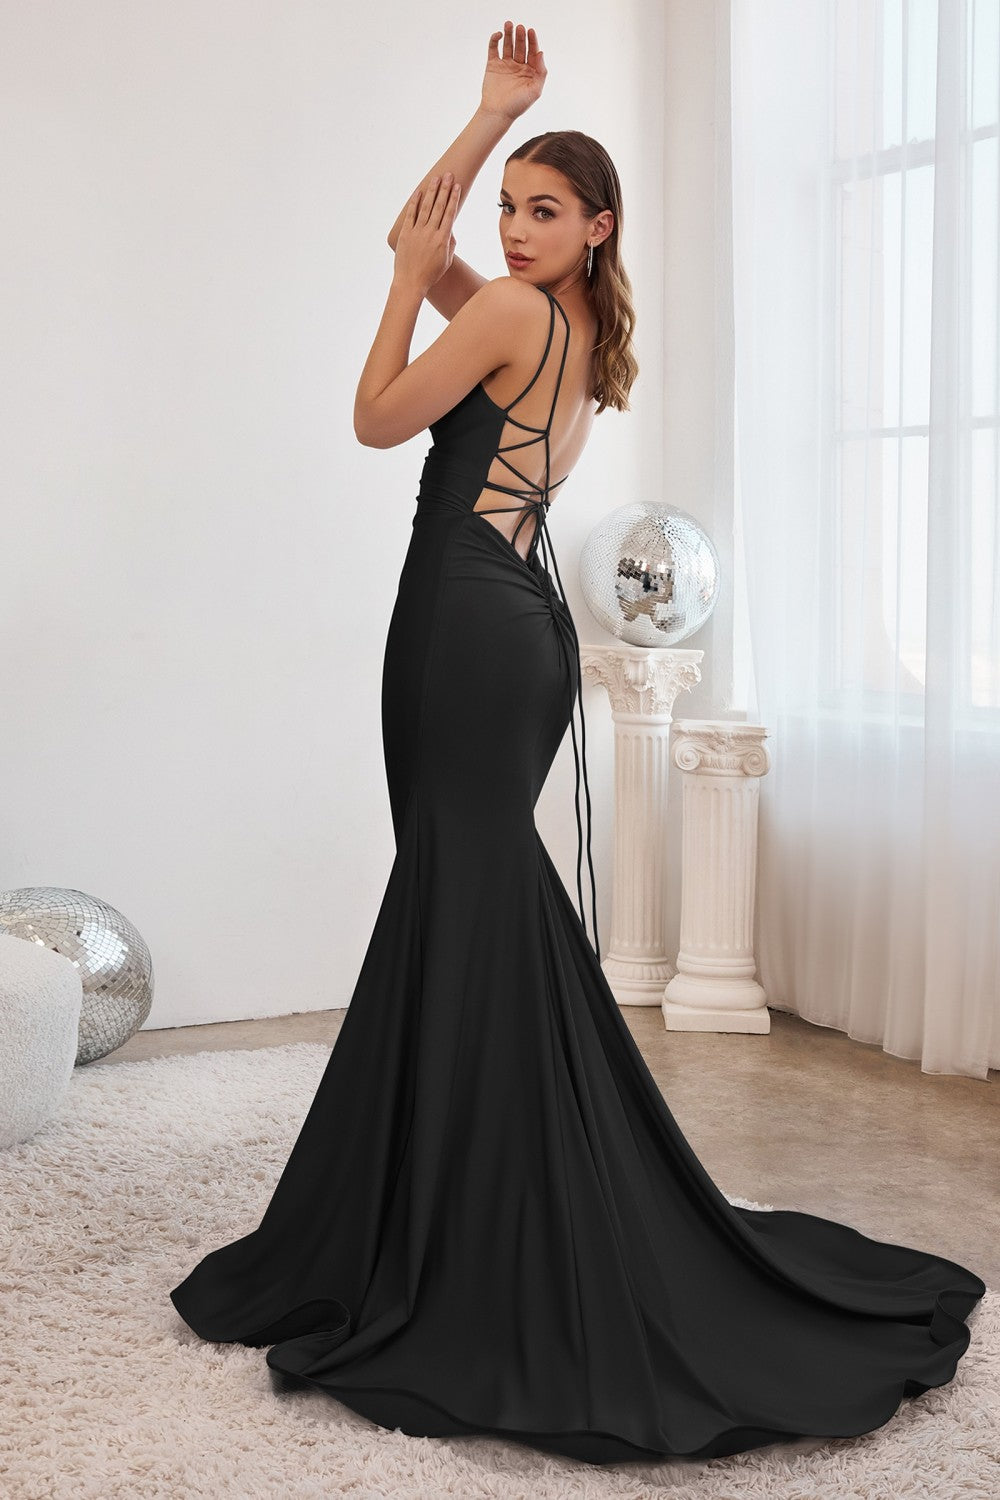 Stretch Mermaid Sexy Gala & Evening Prom Gown Lace Up Back Scoop Neck Bodice Formal Flattering Prom Bridesmaid Dress CDCD2219 Elsy Style Prom Dress